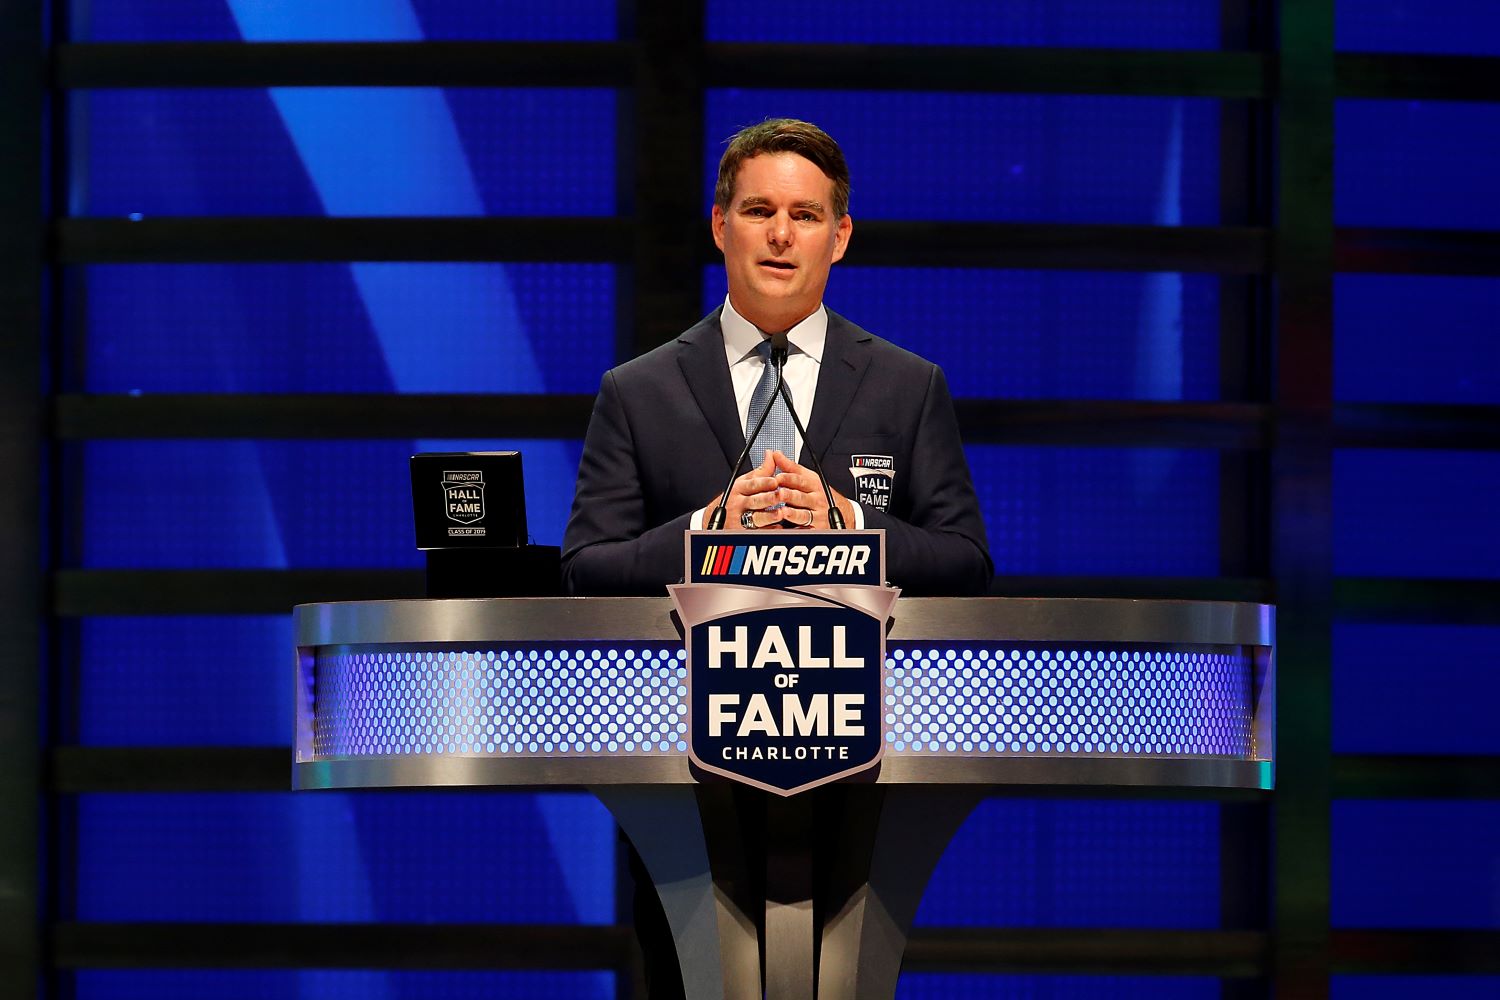 Jeff Gordon speaks on stage as he is inducted into the NASCAR Hall of Fame during the 2019 NASCAR Hall of Fame Induction Ceremony.